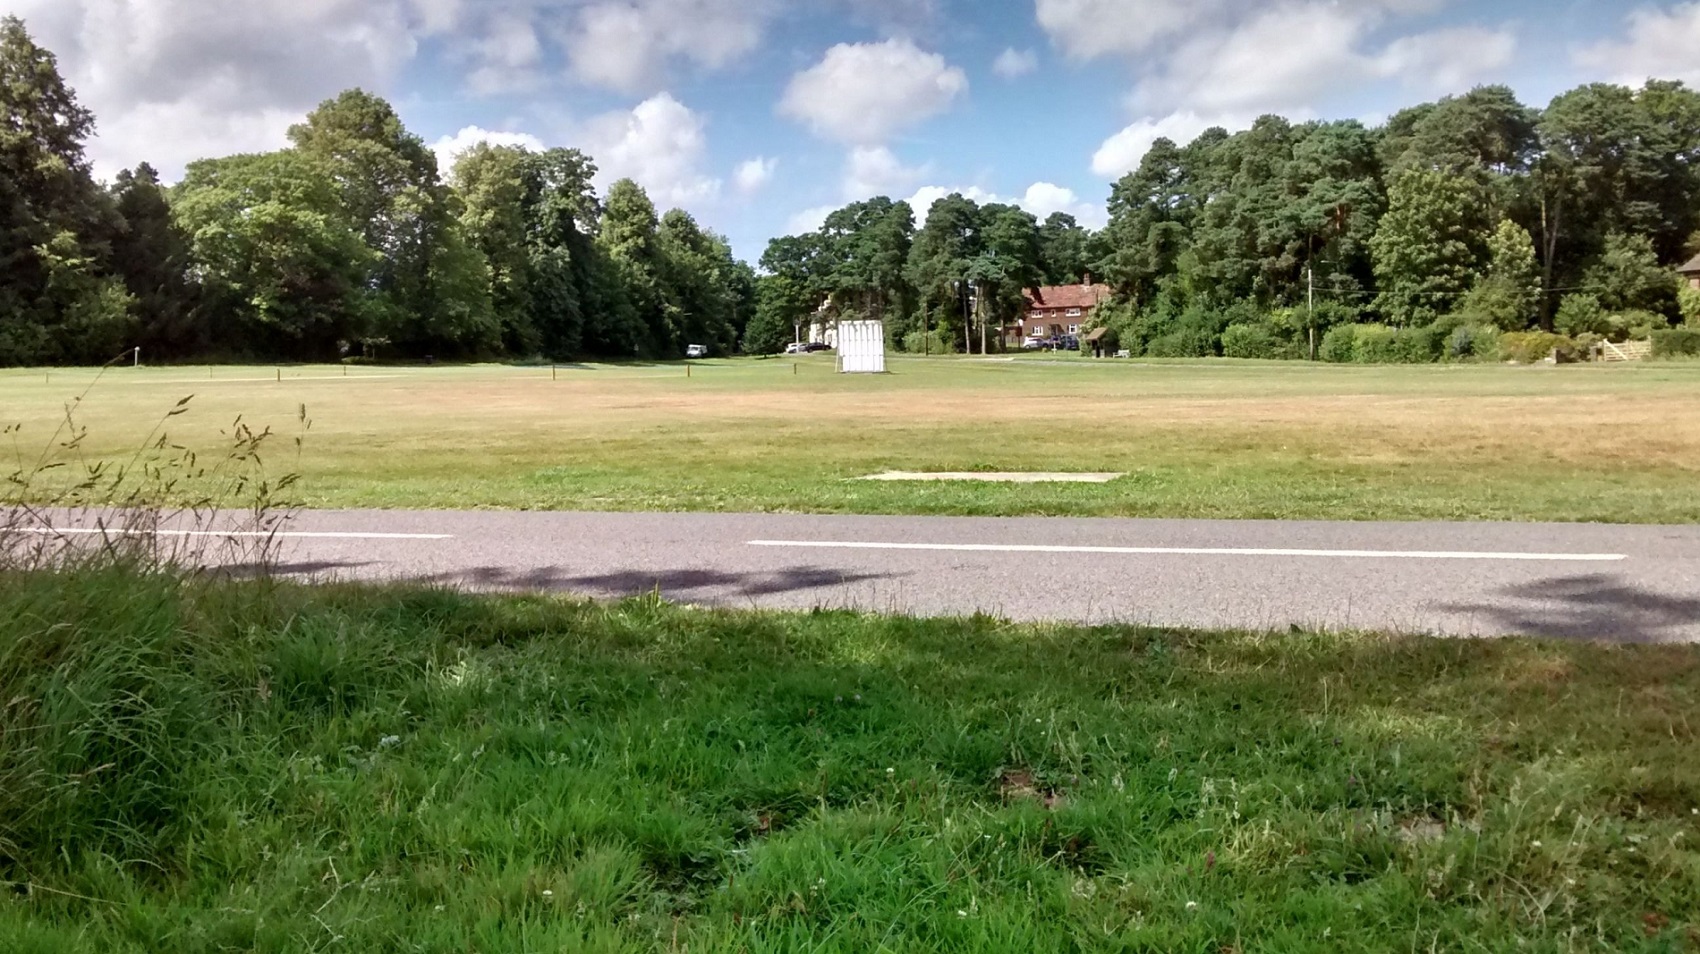 Village green in Sussex on a sunny summer day, with a road in the foreground and a cricket pitch in the background.